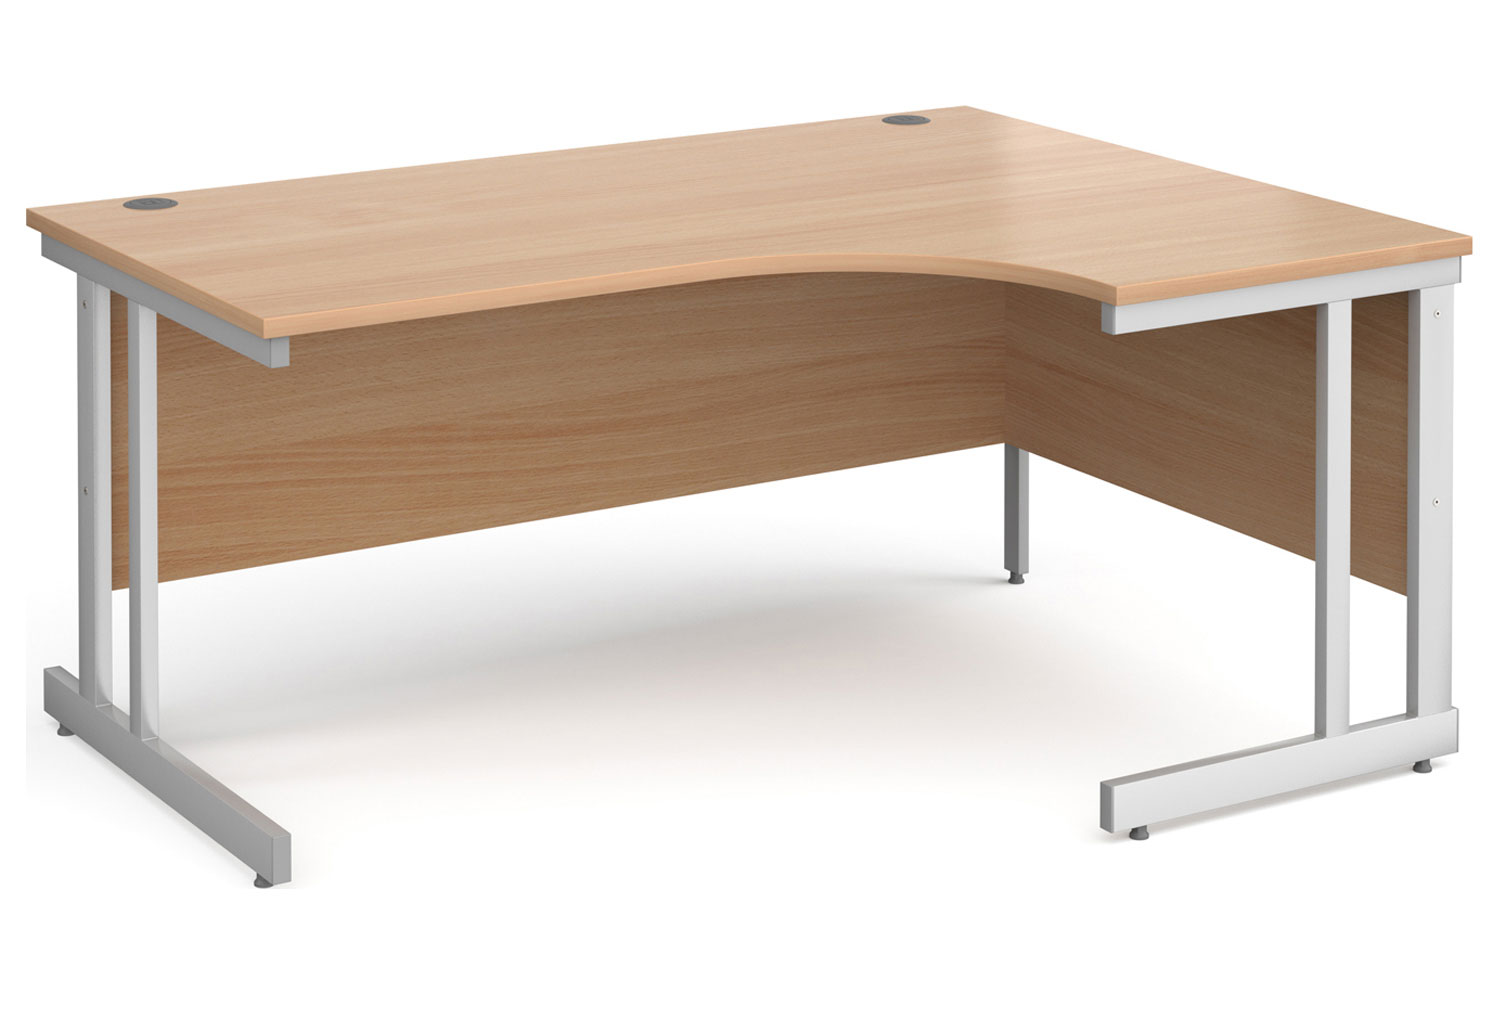 Tully II Right Hand Ergonomic Office Desk, 160wx120/80dx73h (cm), Beech, Express Delivery